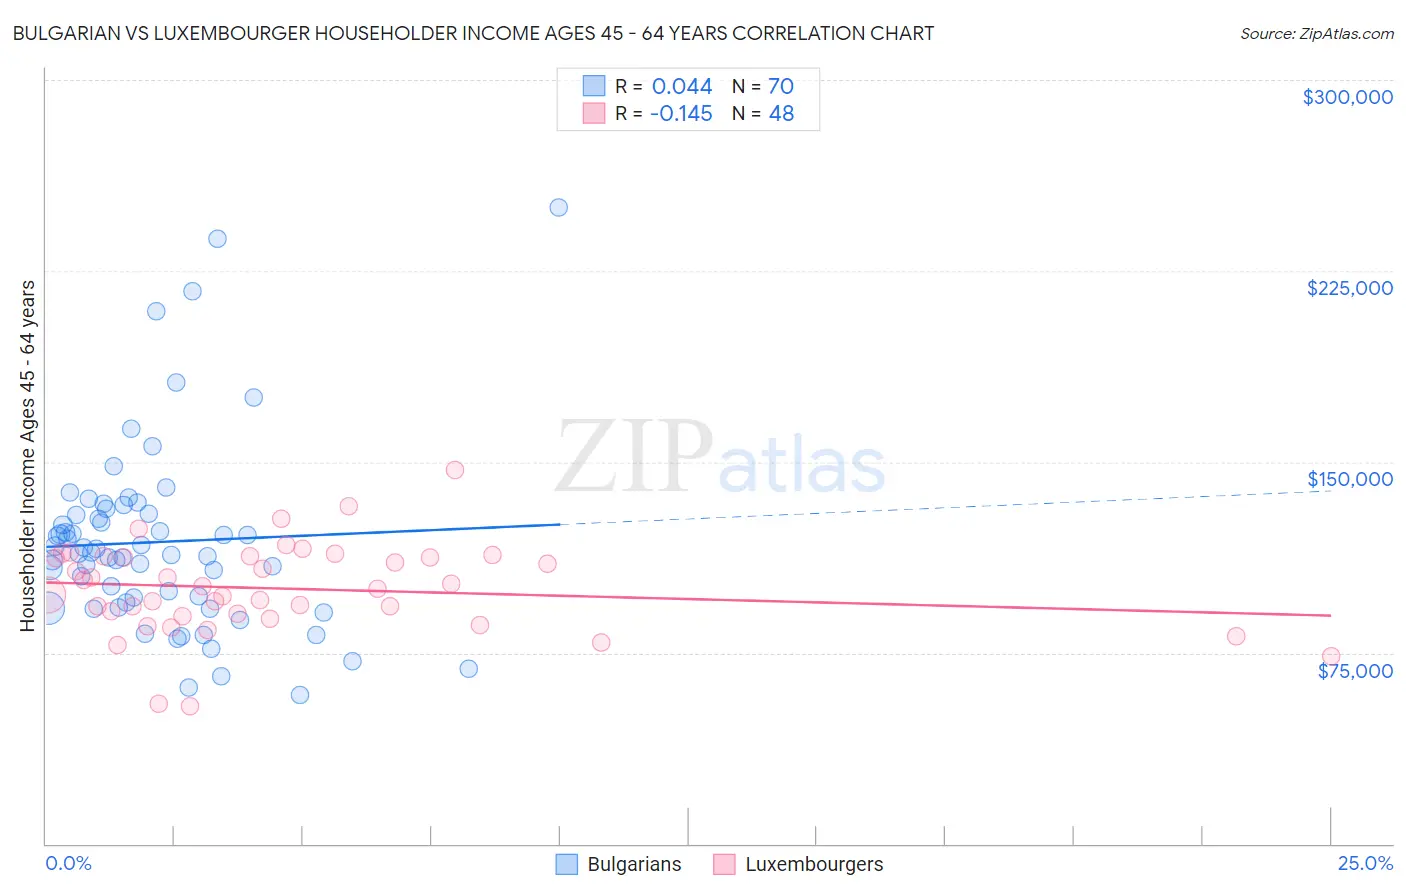 Bulgarian vs Luxembourger Householder Income Ages 45 - 64 years